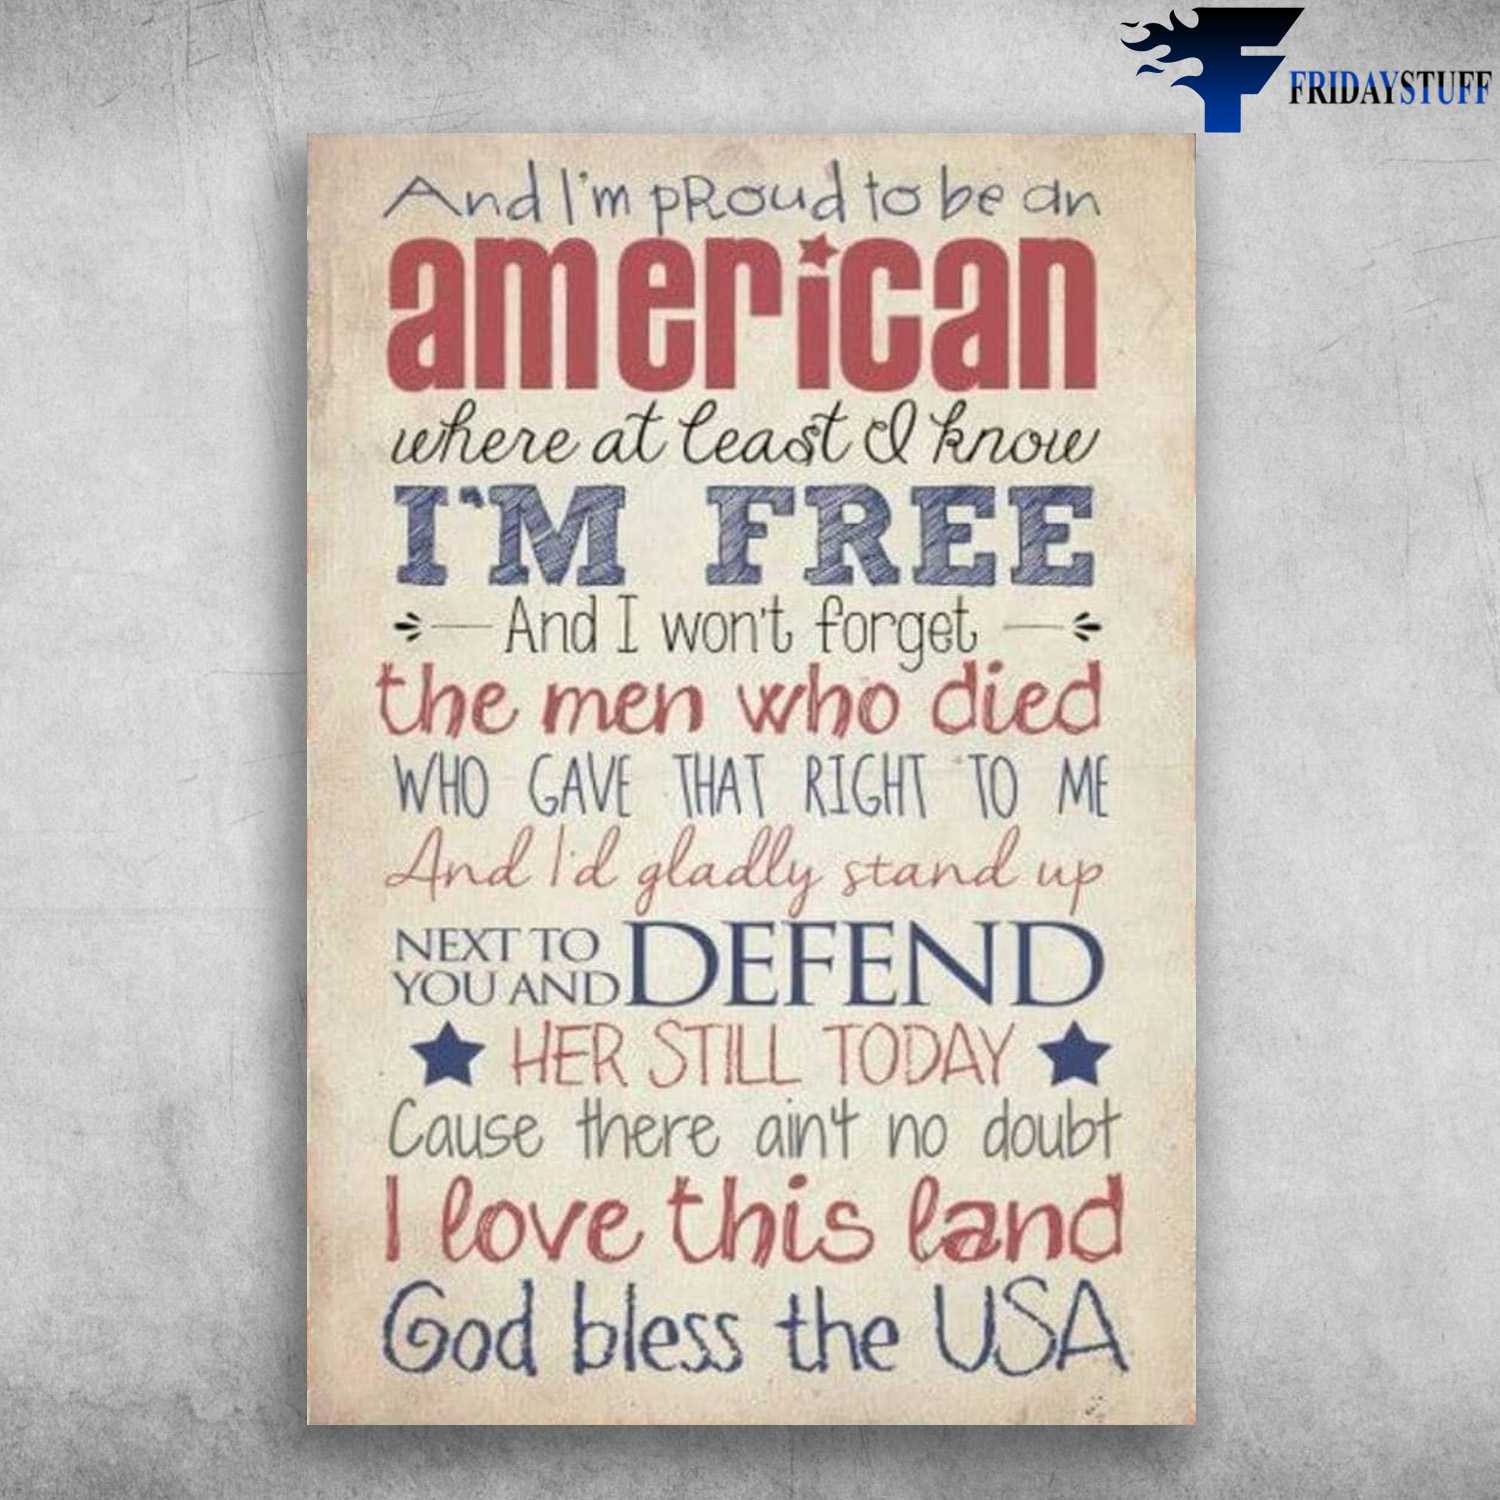 And I'm Proud To Be An American - Where At Least I Know I'm Free, And I won't forget the ones, who died who gave that right to me, And I'll gladly stand up next to you, and defend her still today